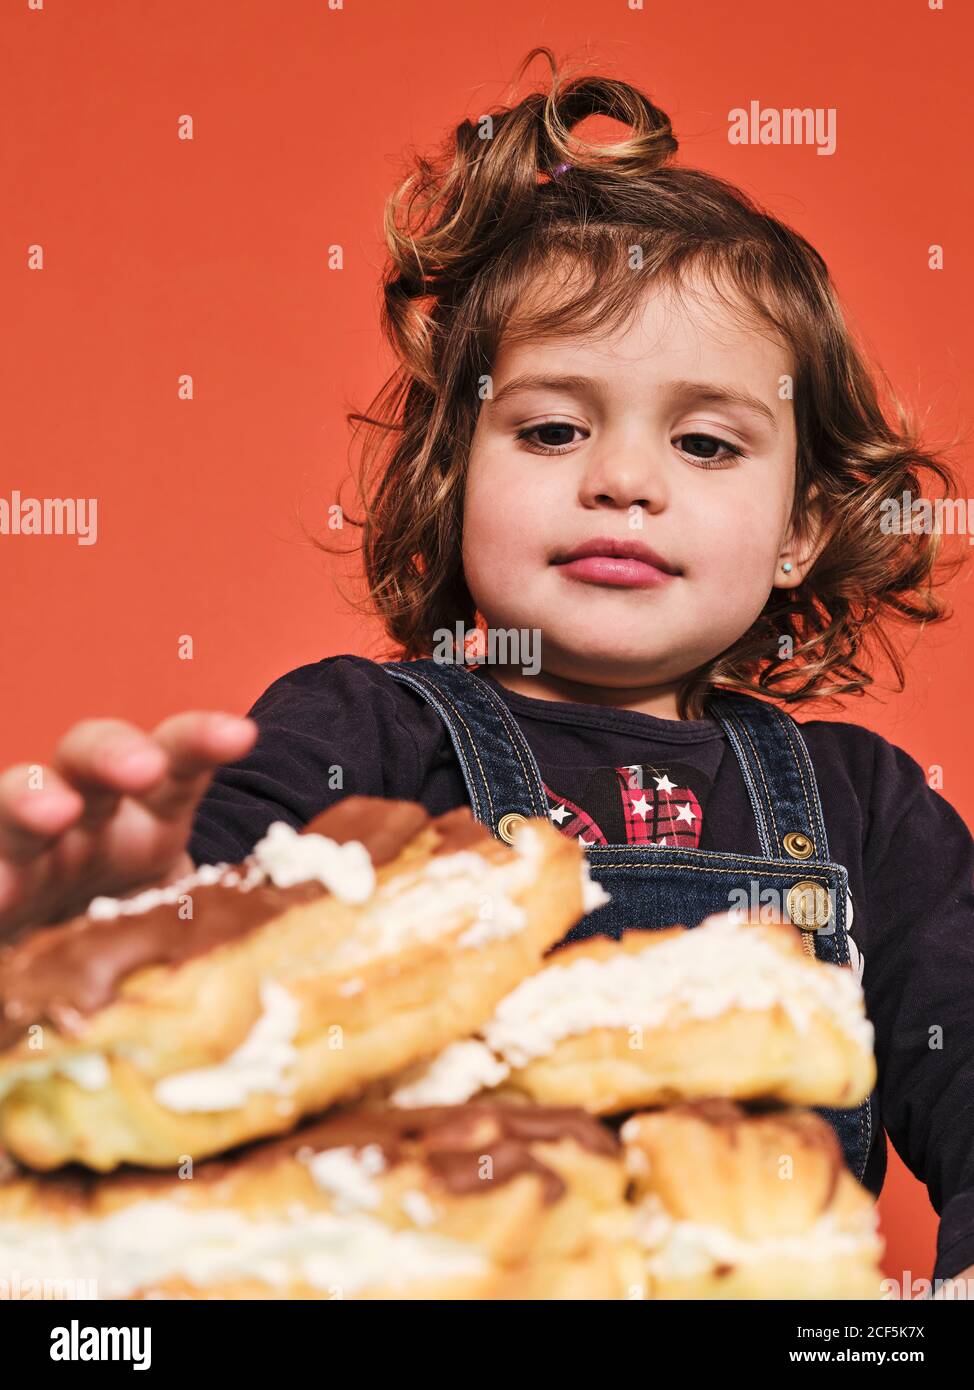 Happy little girl enjoying sweet eclairs with chocolate while sitting at table against red background Stock Photo